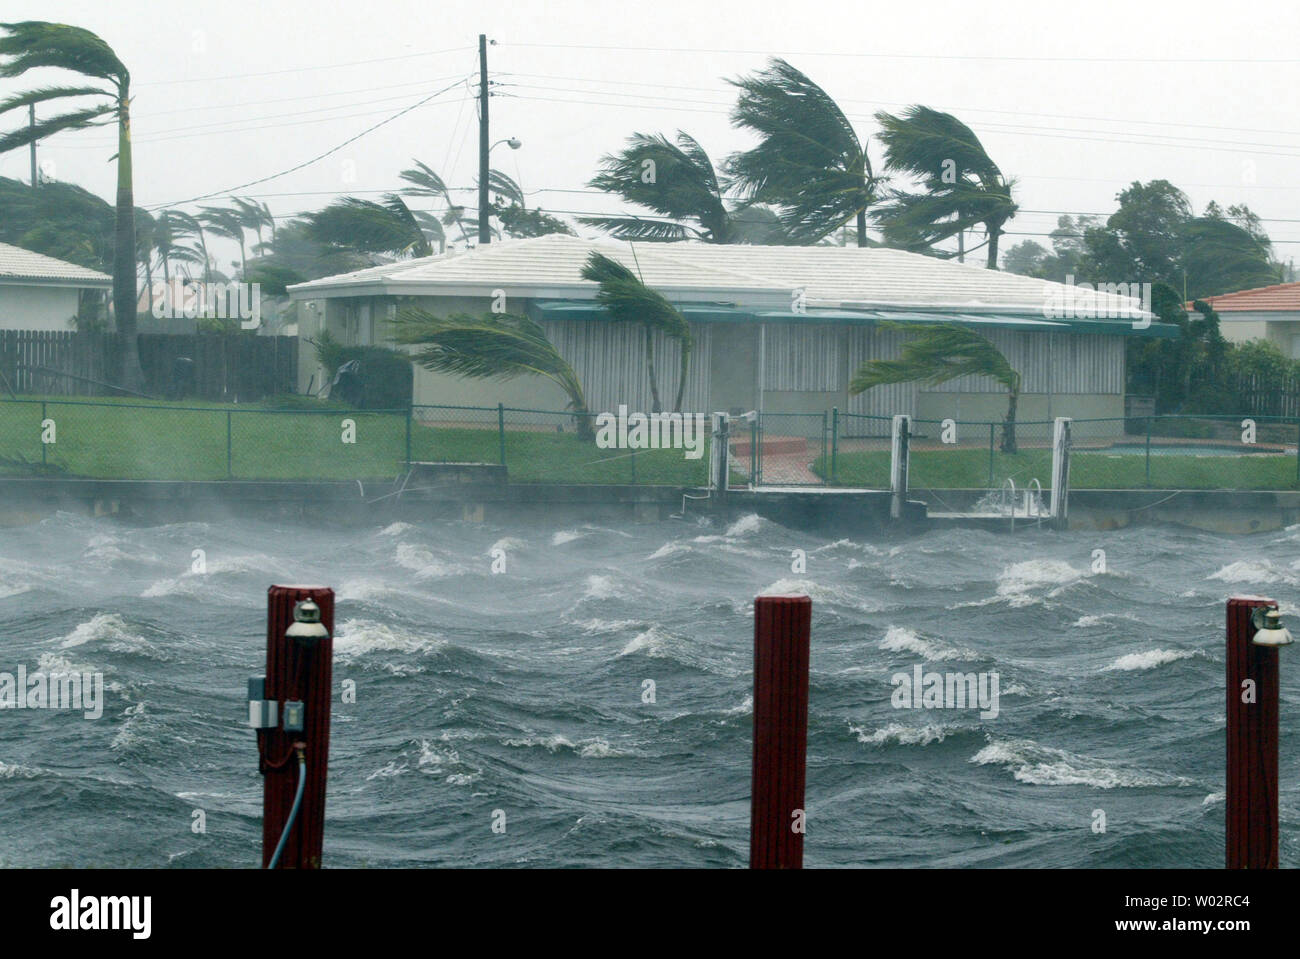 Hurricane Wilma hits south Florida October 24, 2005 with catagory 3 winds, causing widespread damage, power outages, and flooding.  (UPI Photo/Susan Knowles) Stock Photo